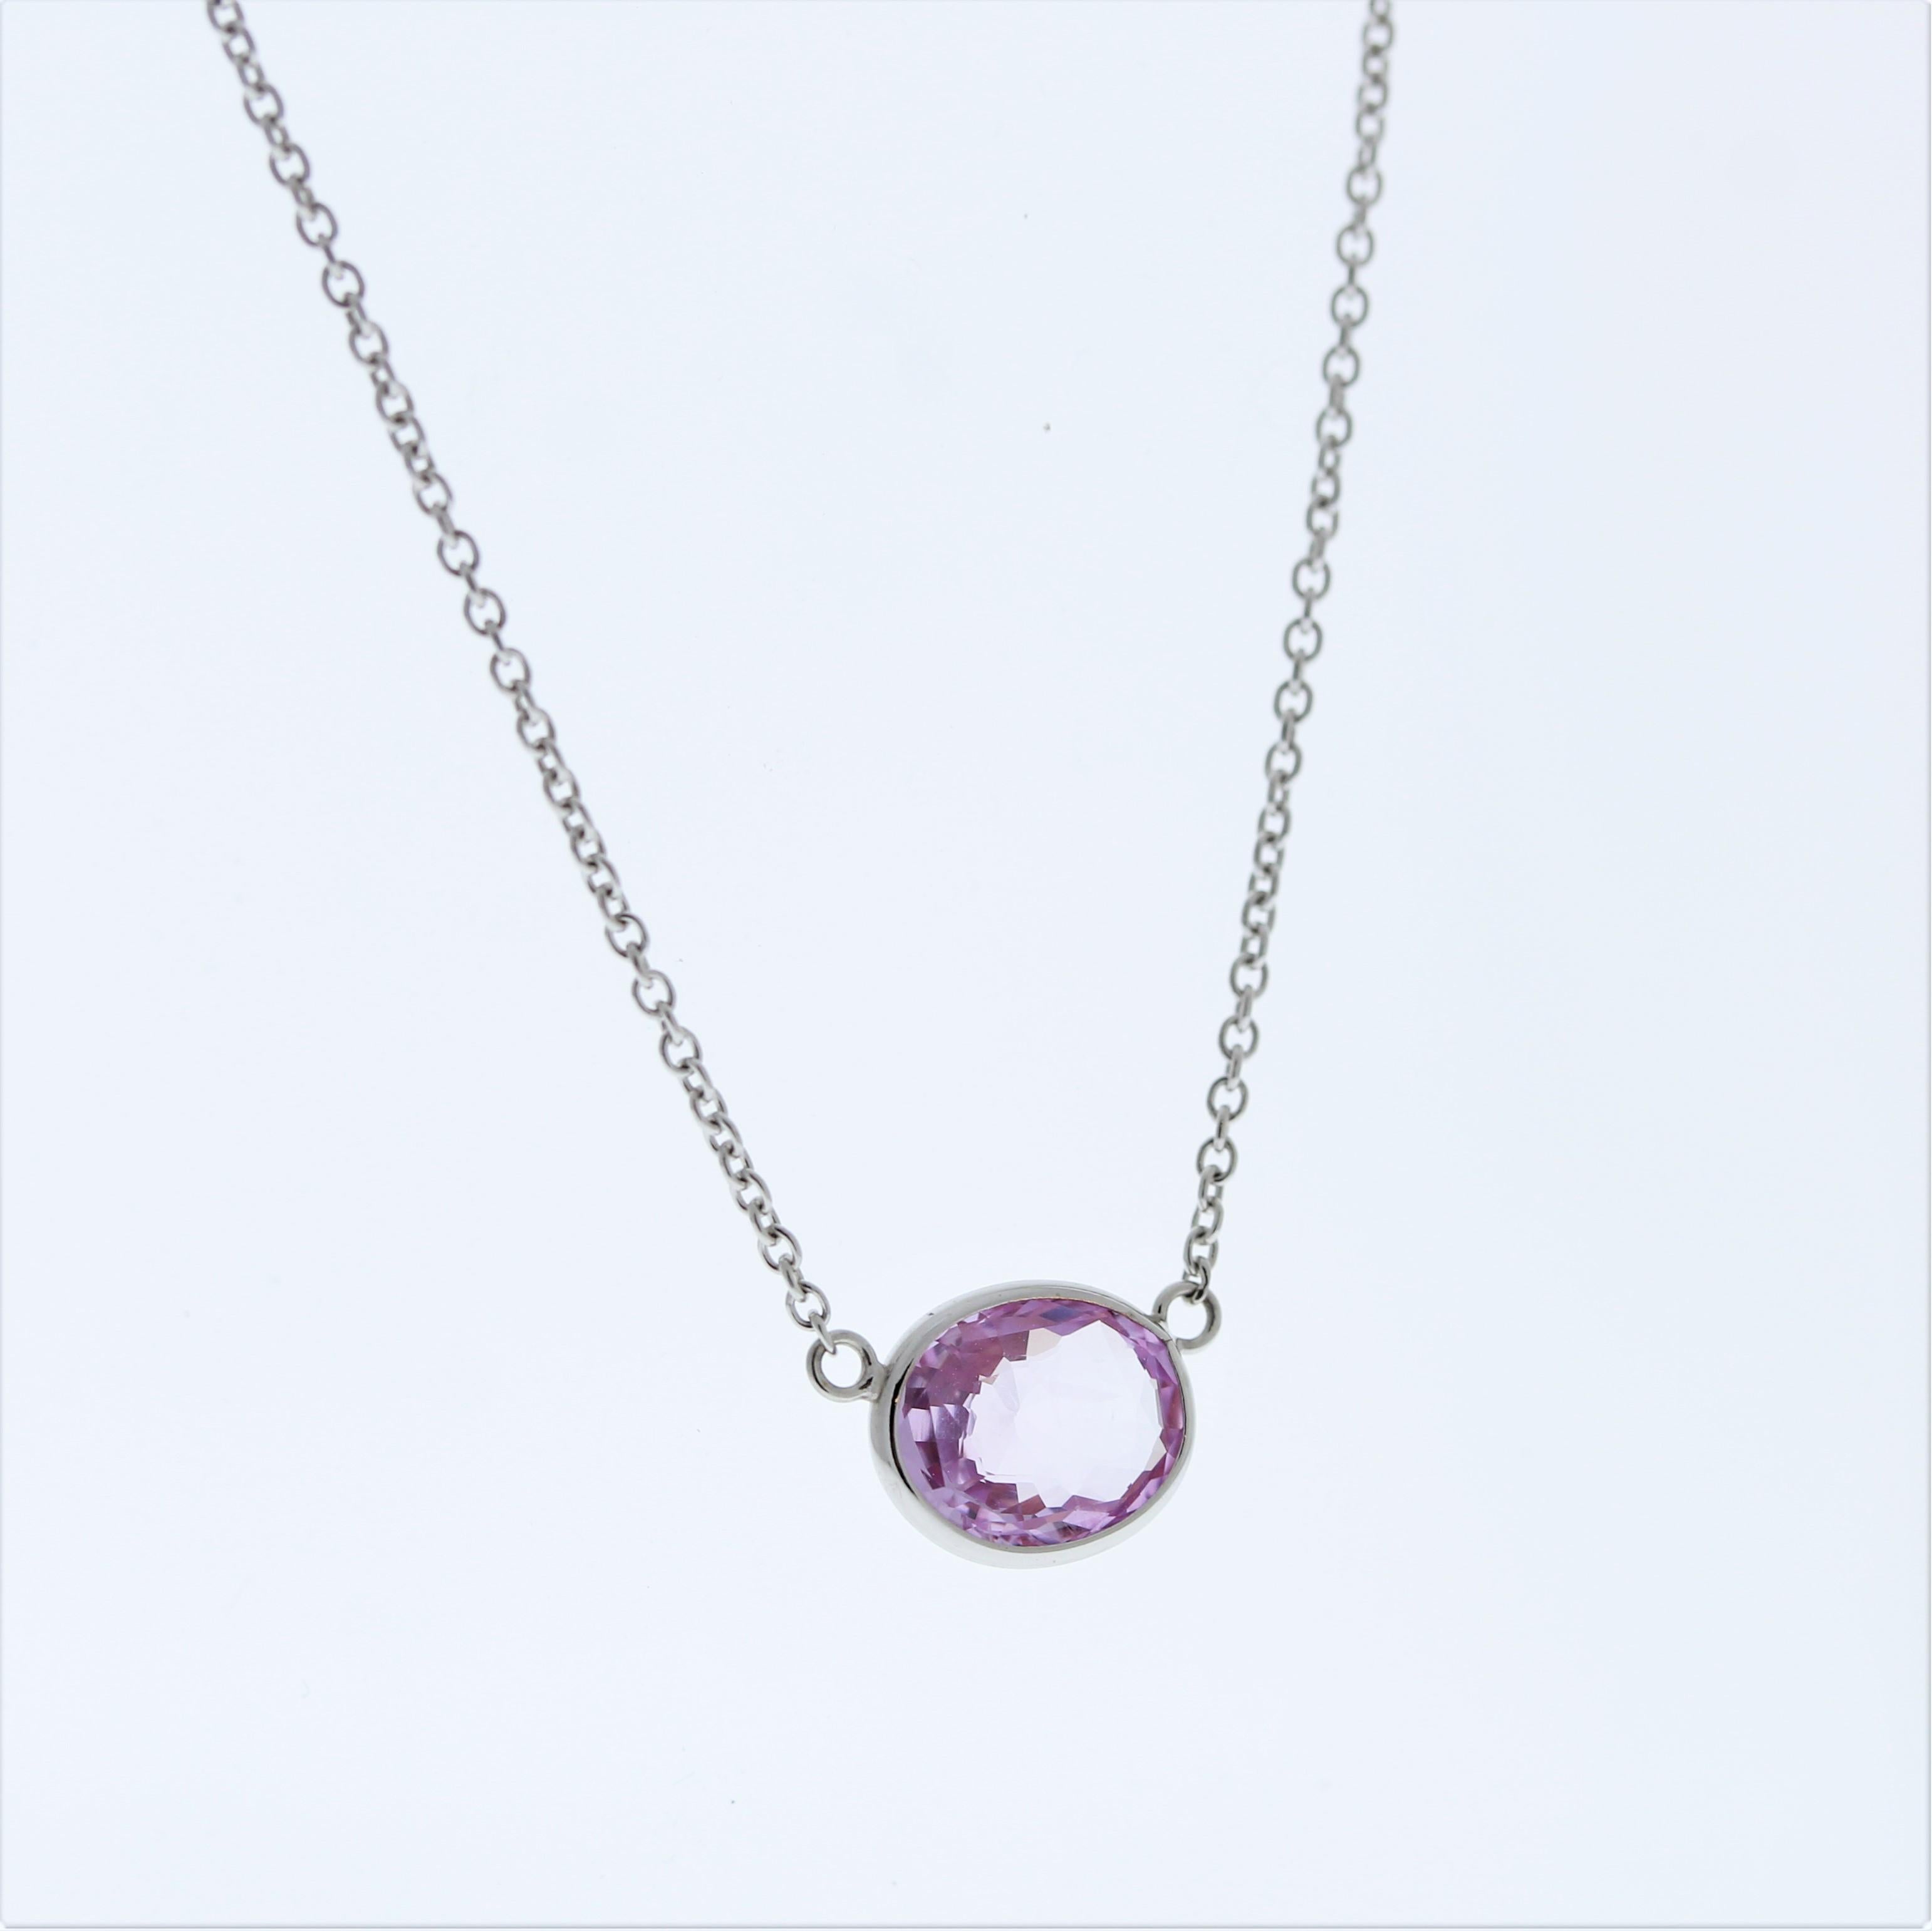 A necklace featuring a 2.07-carat padparadscha gemstone in an oval shape with a purplish pink hue set in 14k white gold would likely be a stunning and eye-catching piece of jewelry, perfect for adding a touch of elegance and sophistication to any